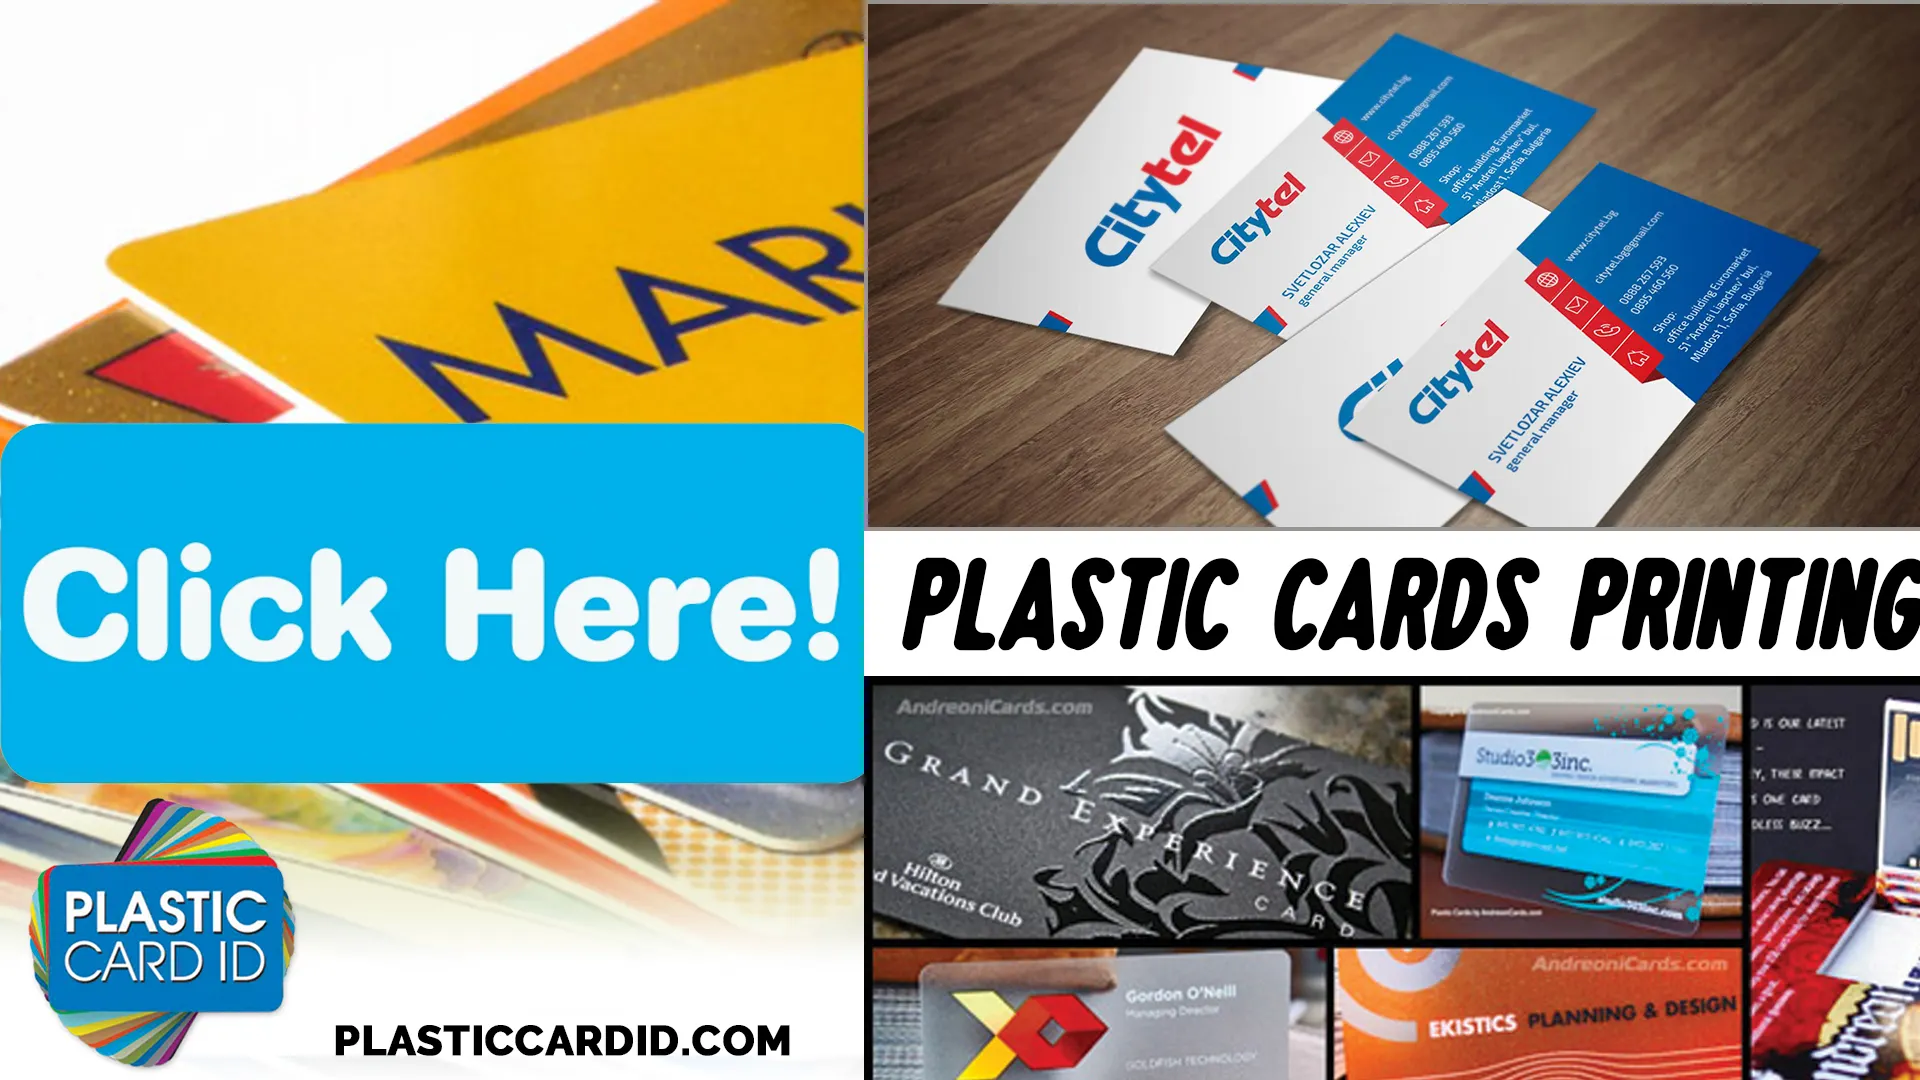 The Game-Changer in Operations: Plastic Card Printers